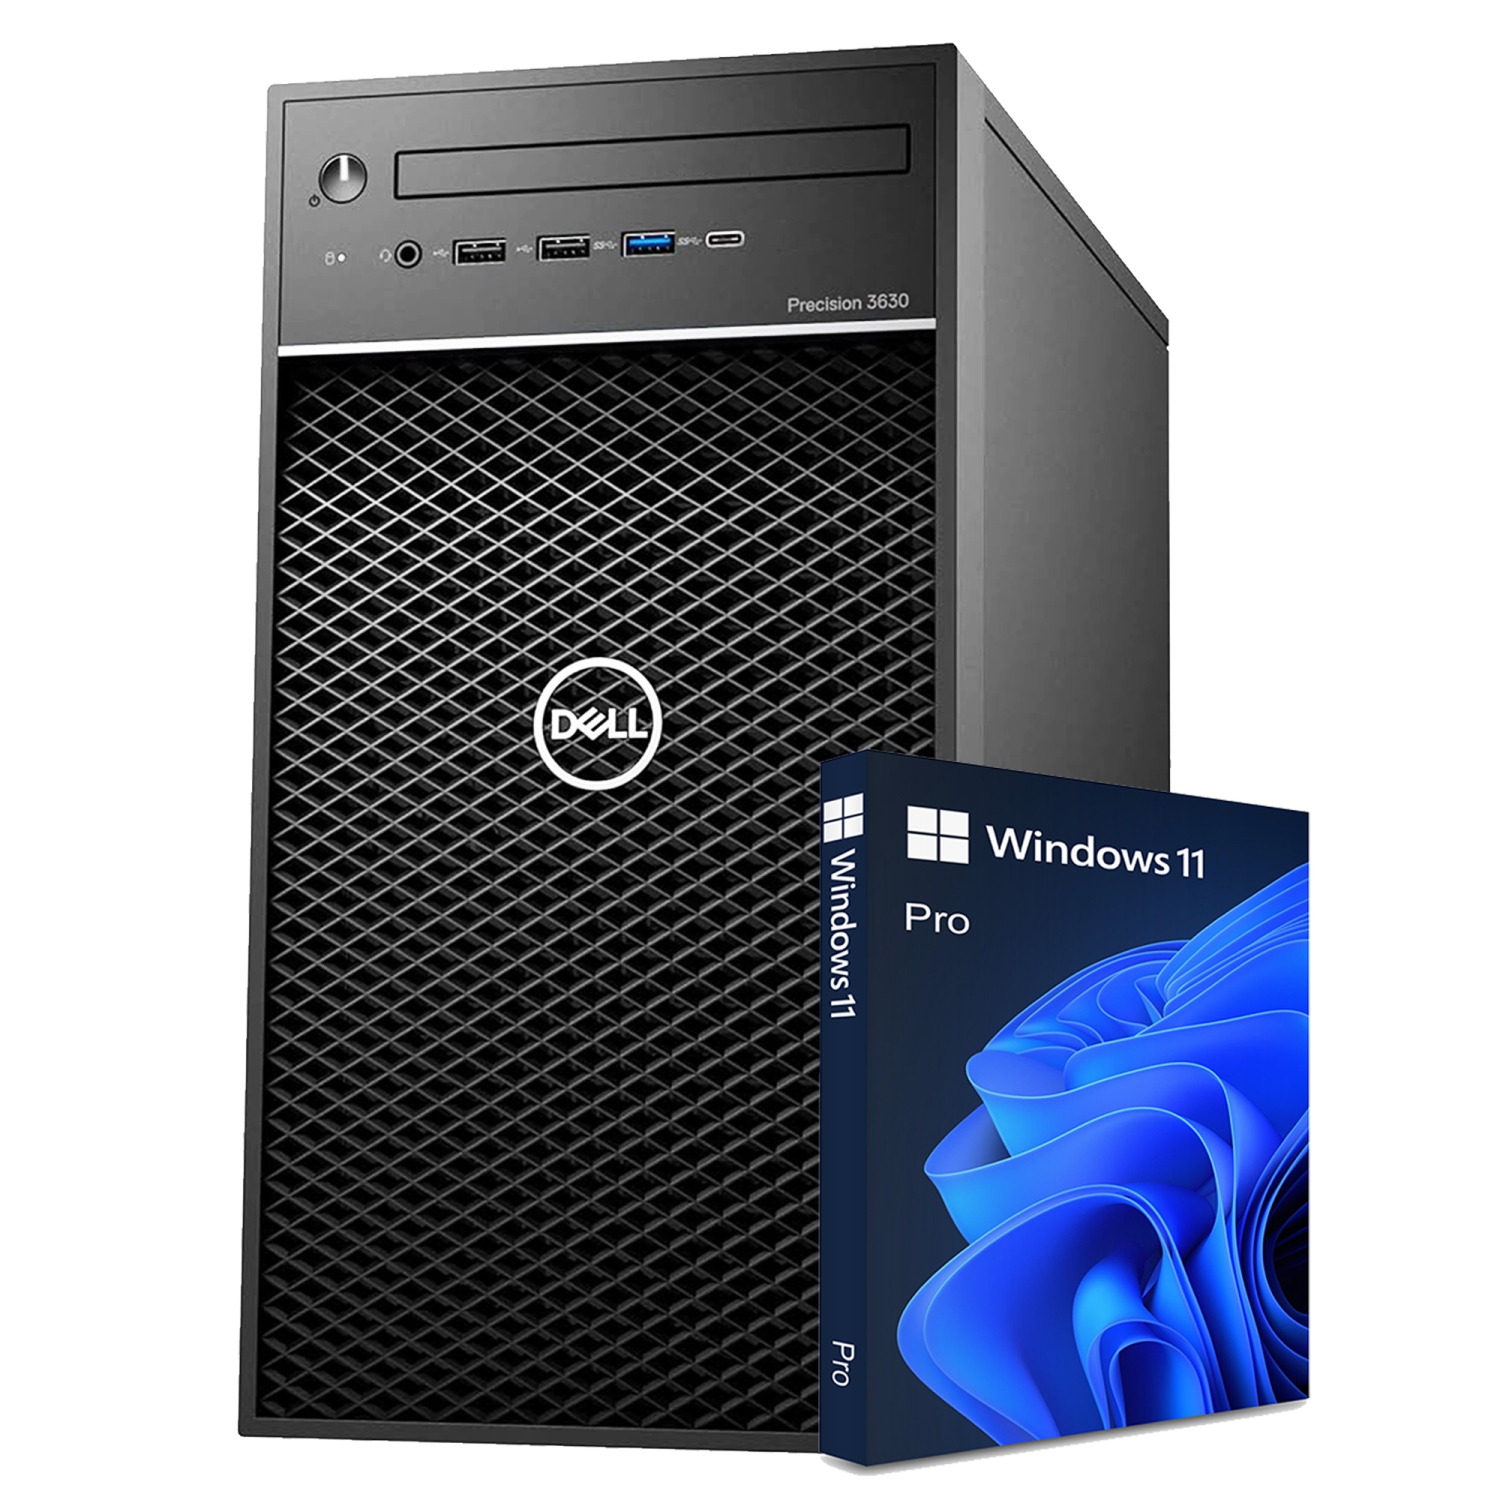 Refurbished (Good) - Dell Precision 3630 High Performance Desktop Computer Tower PC, Intel Core i5 8th Gen, Windows 11 Pro, 16GB DDR4 RAM, 1TB SSD, RGB Keyboard and Mouse, WIFI